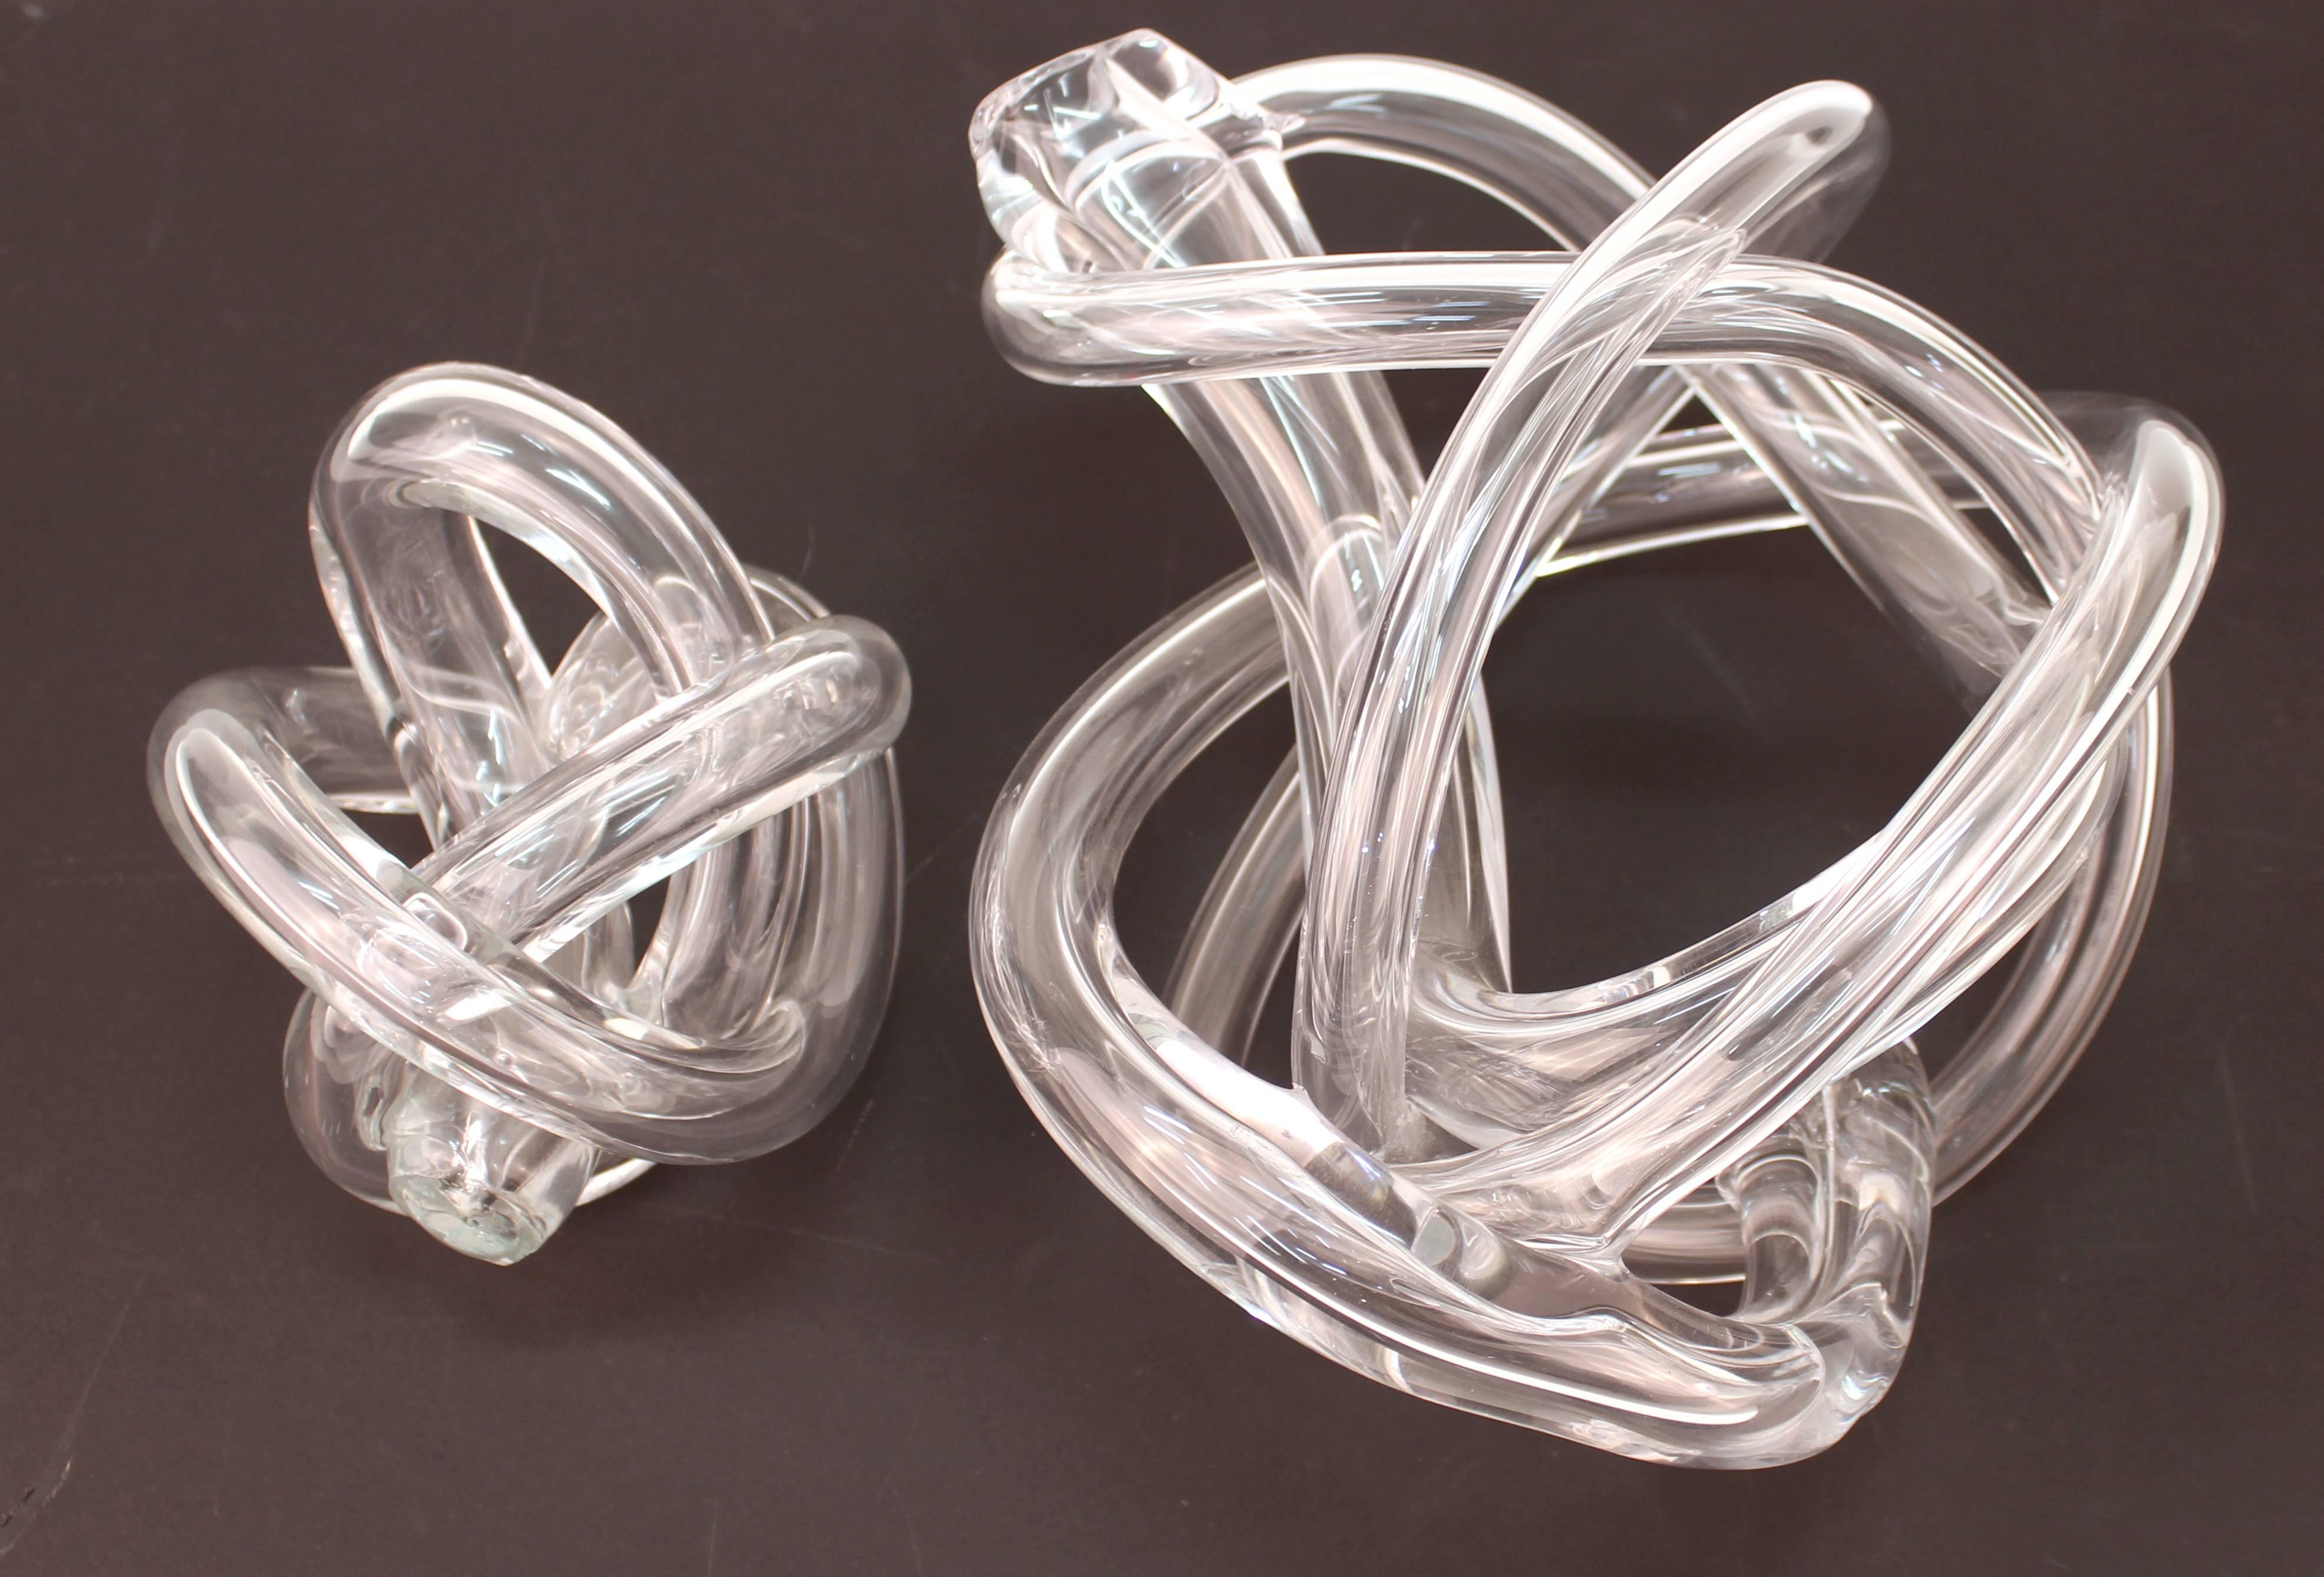 A set of two Italian Mid-Century Modern handblown art glass sculptures forming abstract knotted shapes, one smaller and one larger, in clear glass. The set is in excellent condition.